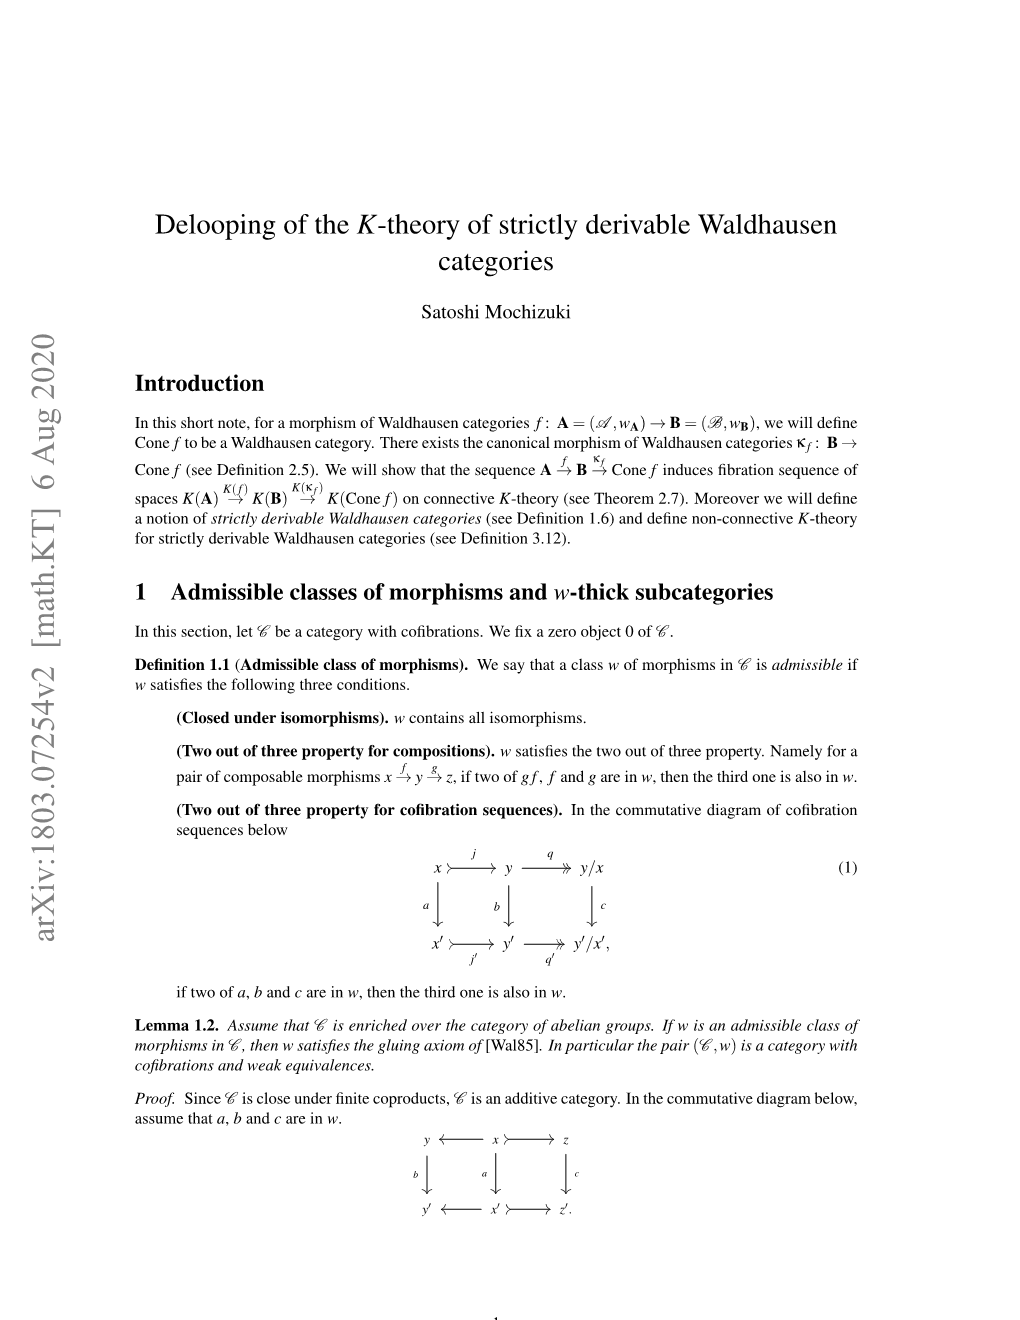 Delooping of the $ K $-Theory of Strictly Derivable Waldhausen Categories